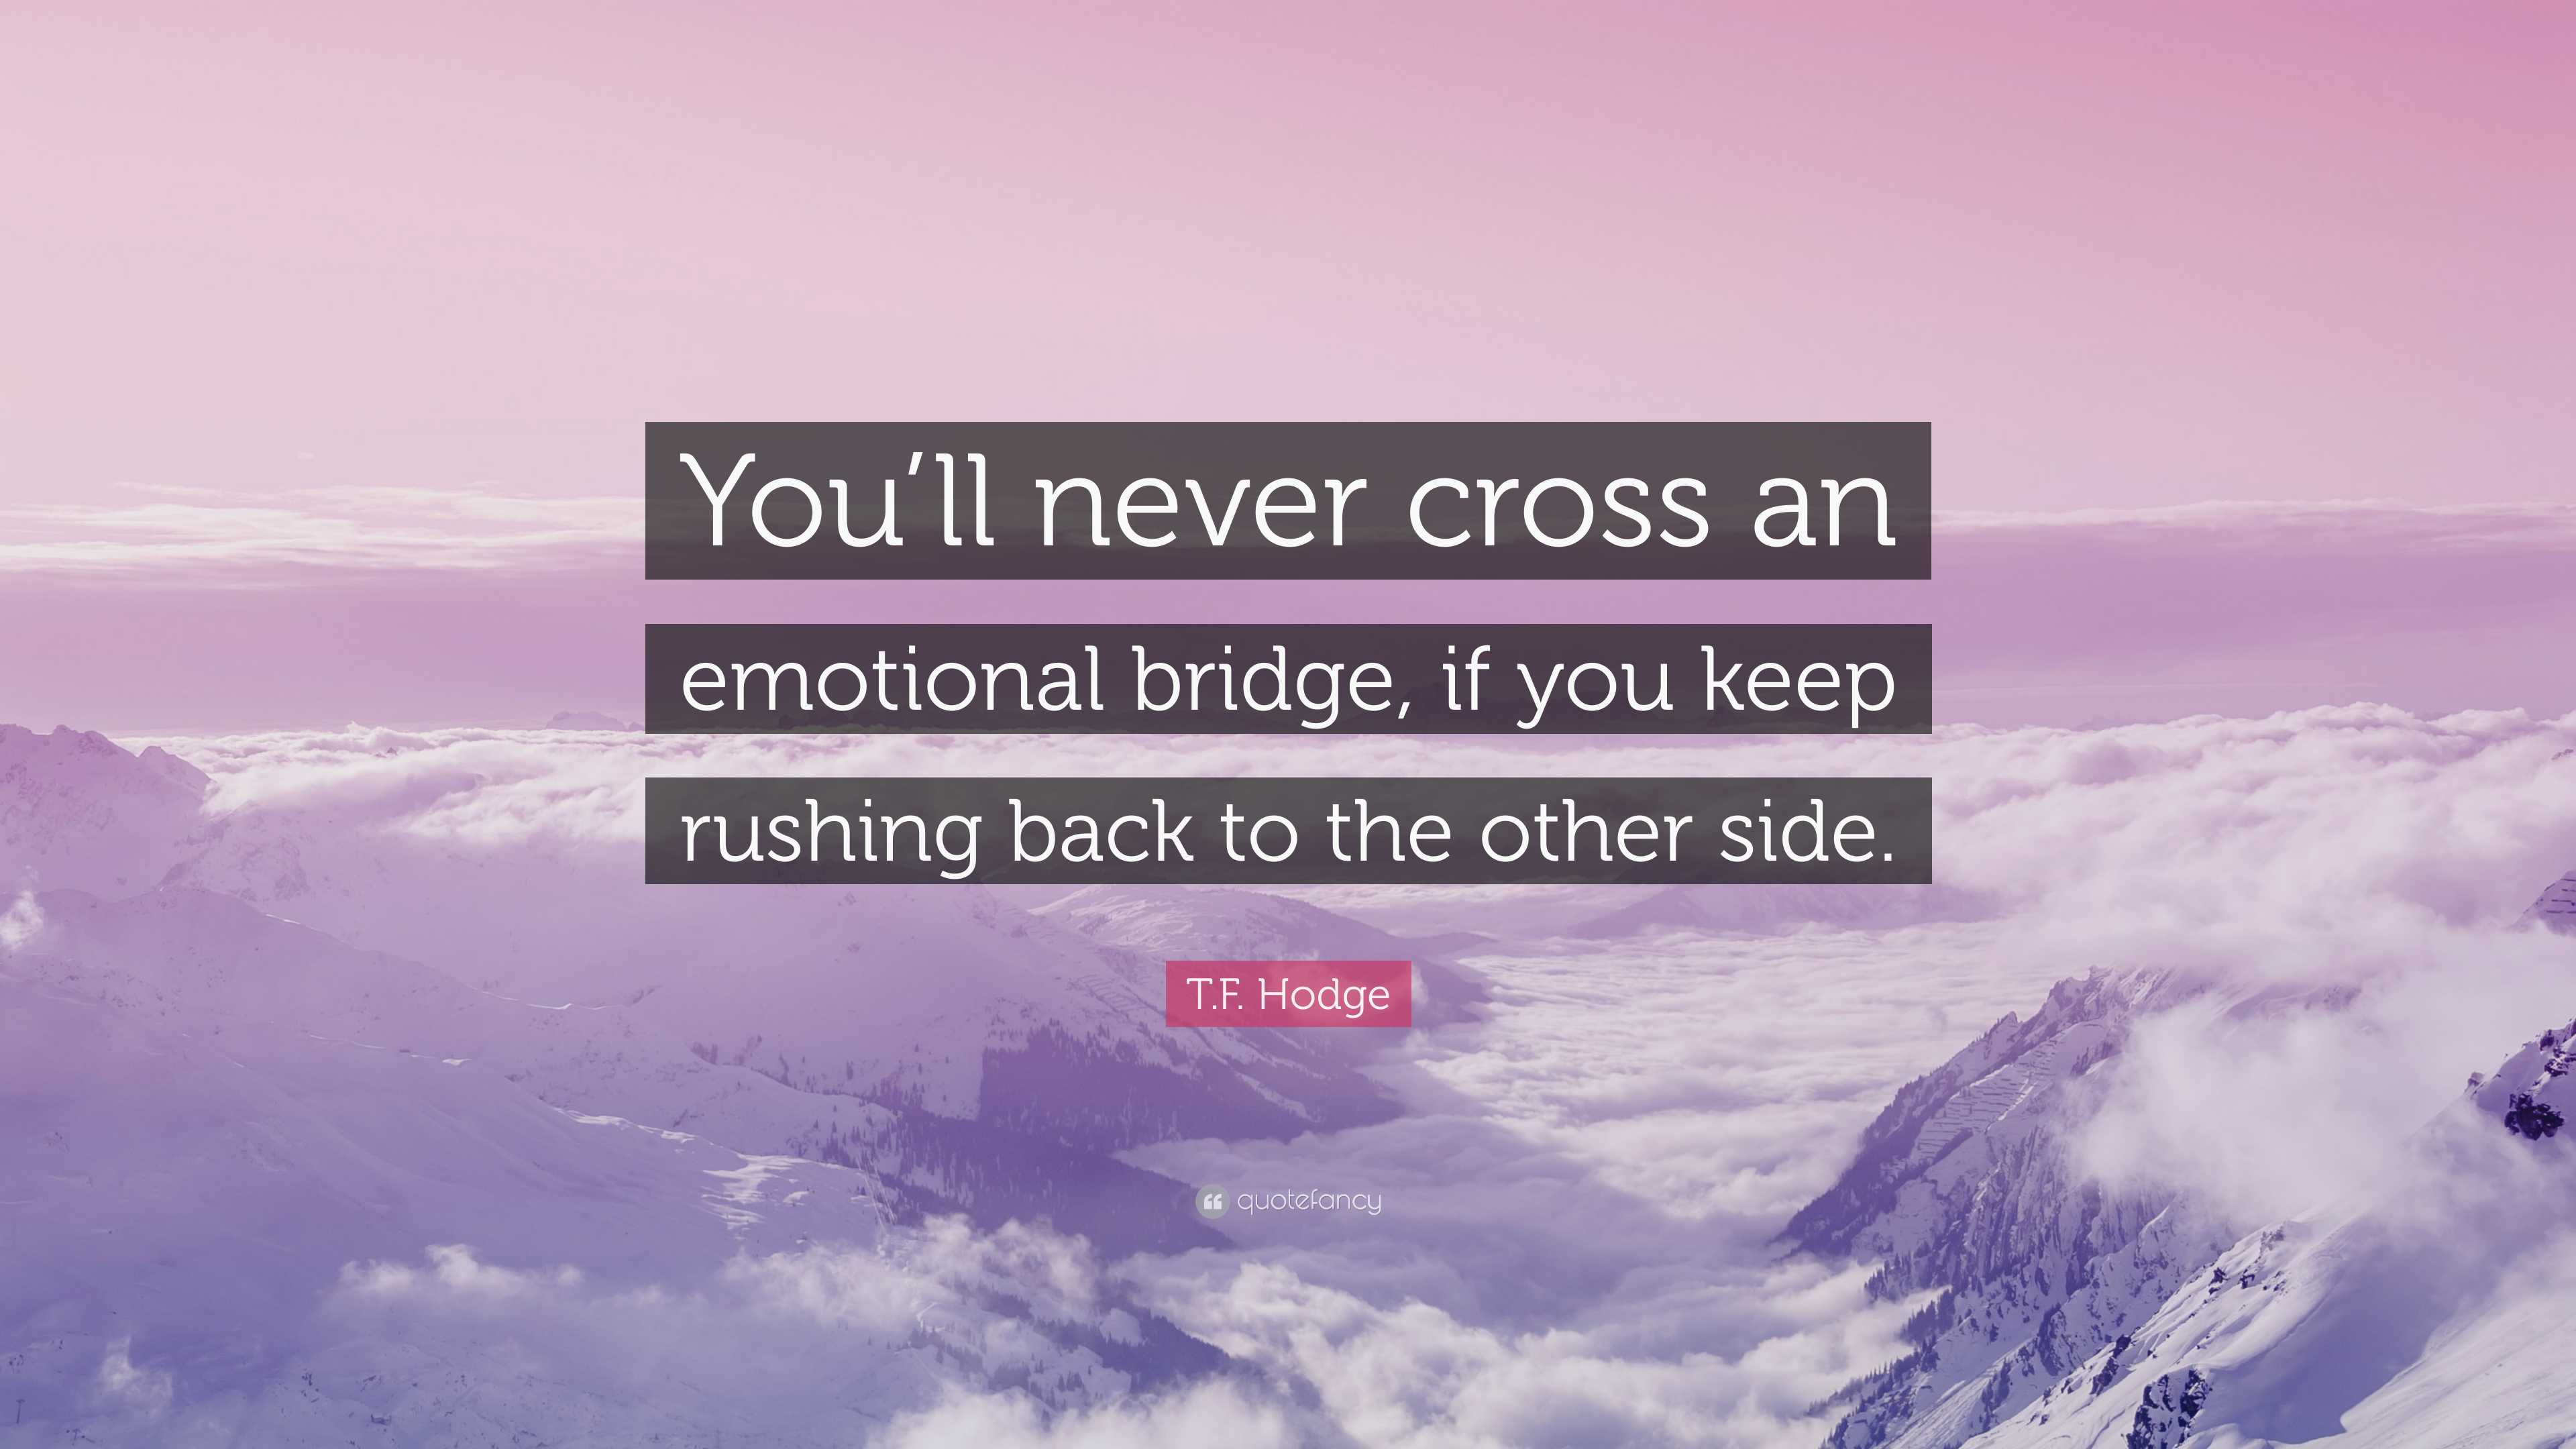 My Back Was A Bridge For You To Cross